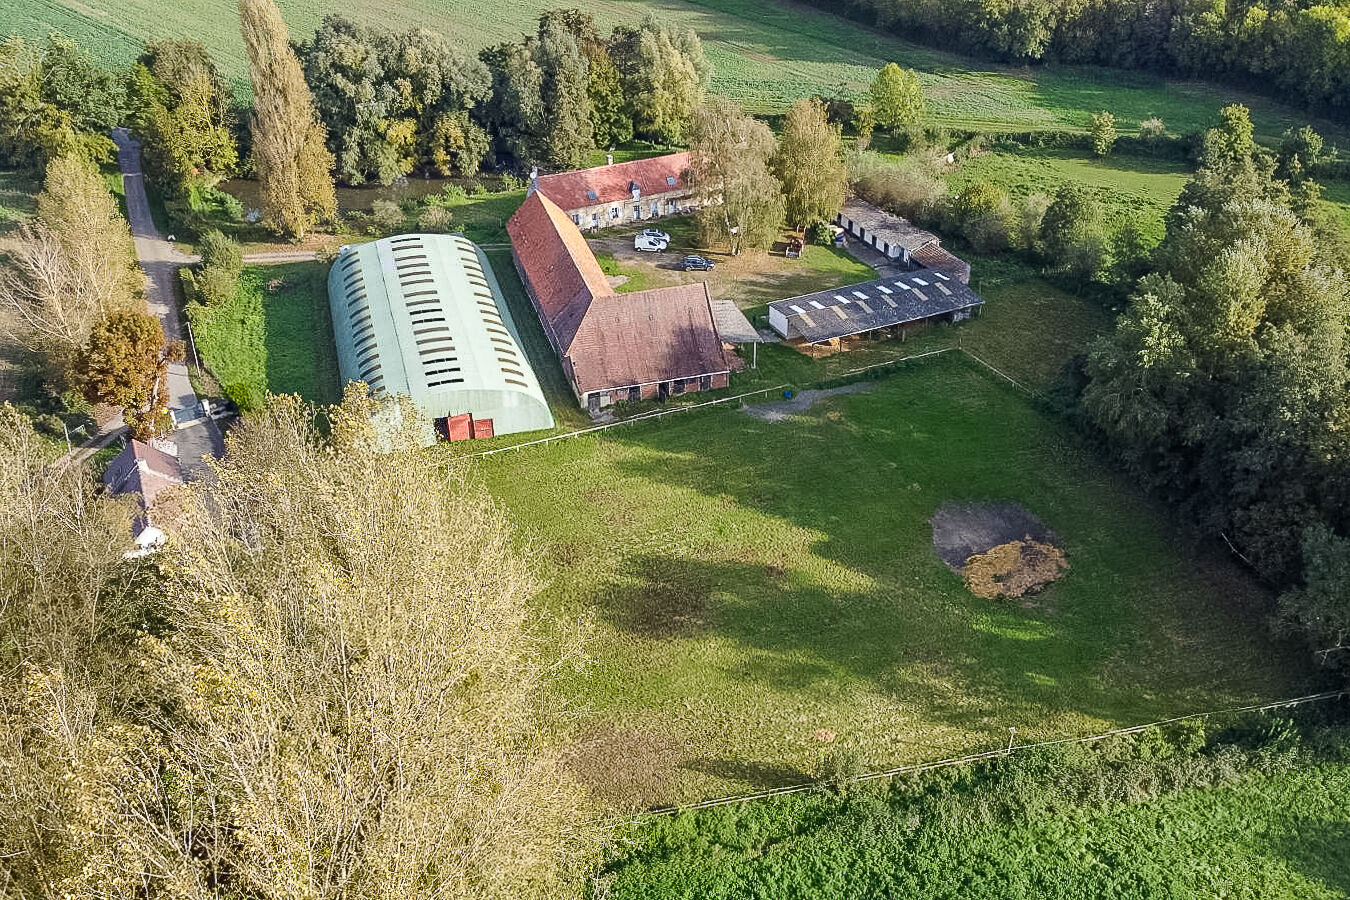 Character equestrian farm set in a preserved bucolic environment